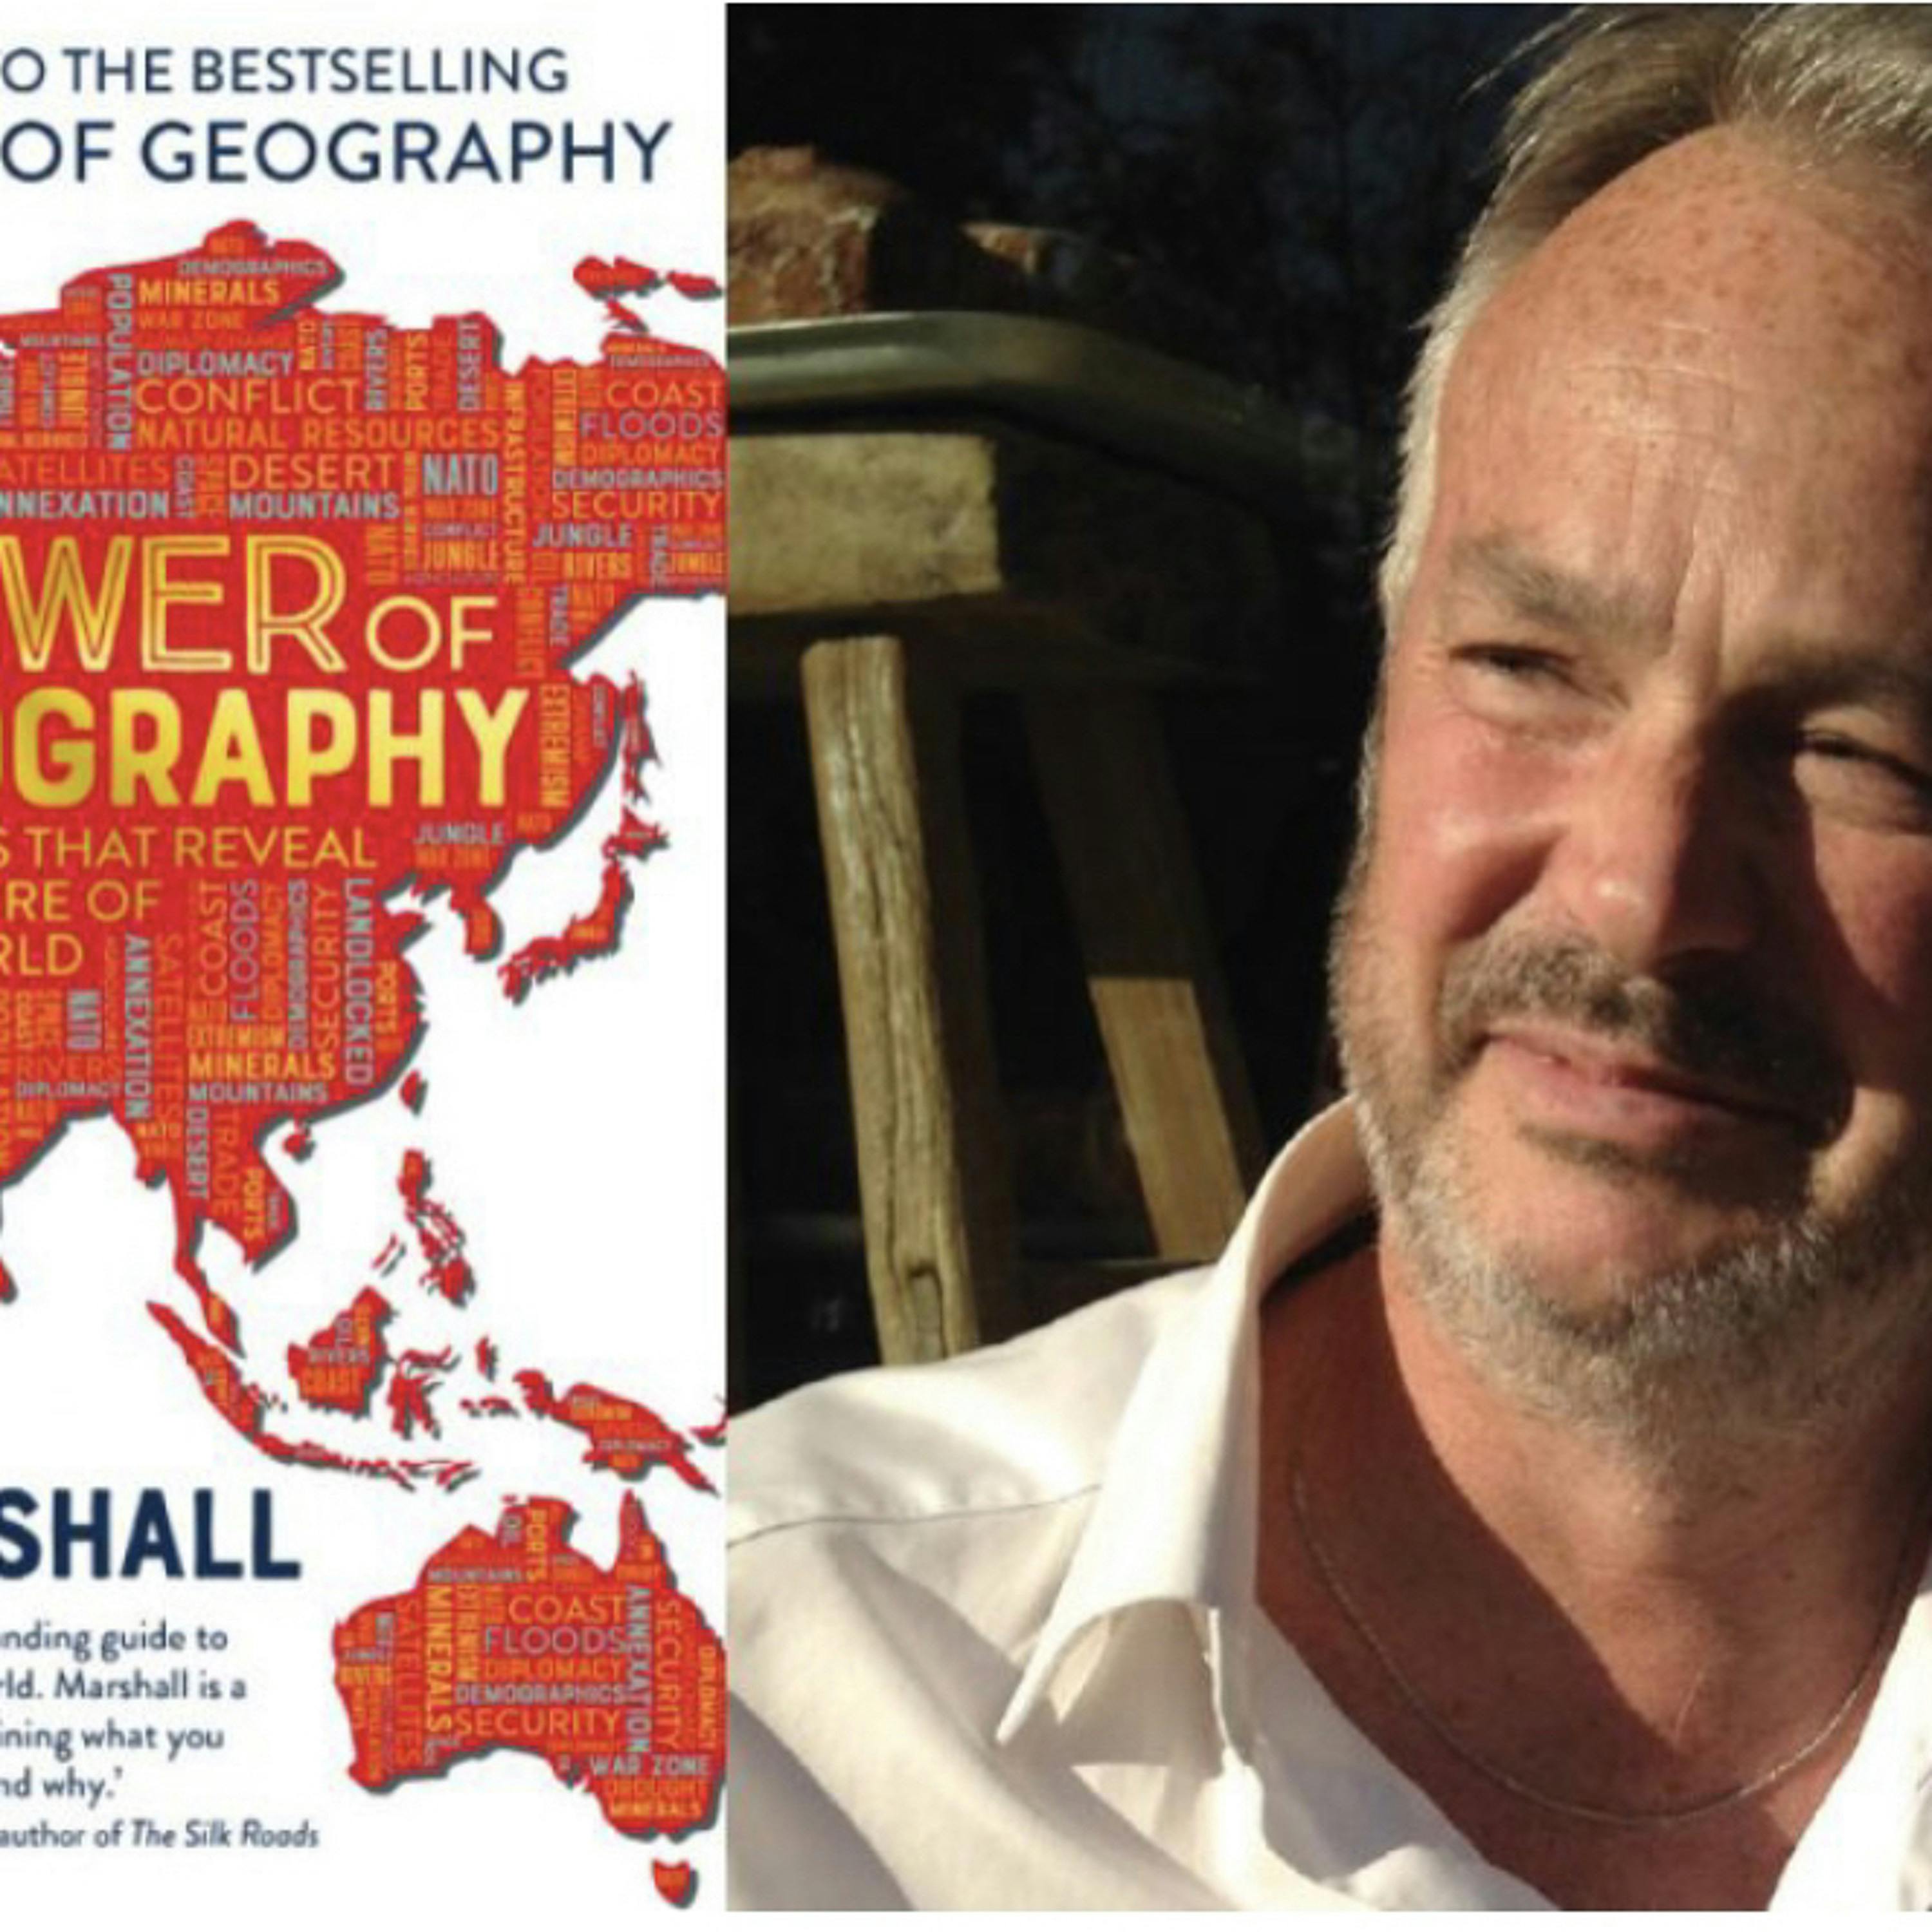 61: Tim Marshall: The Power of Geography, 